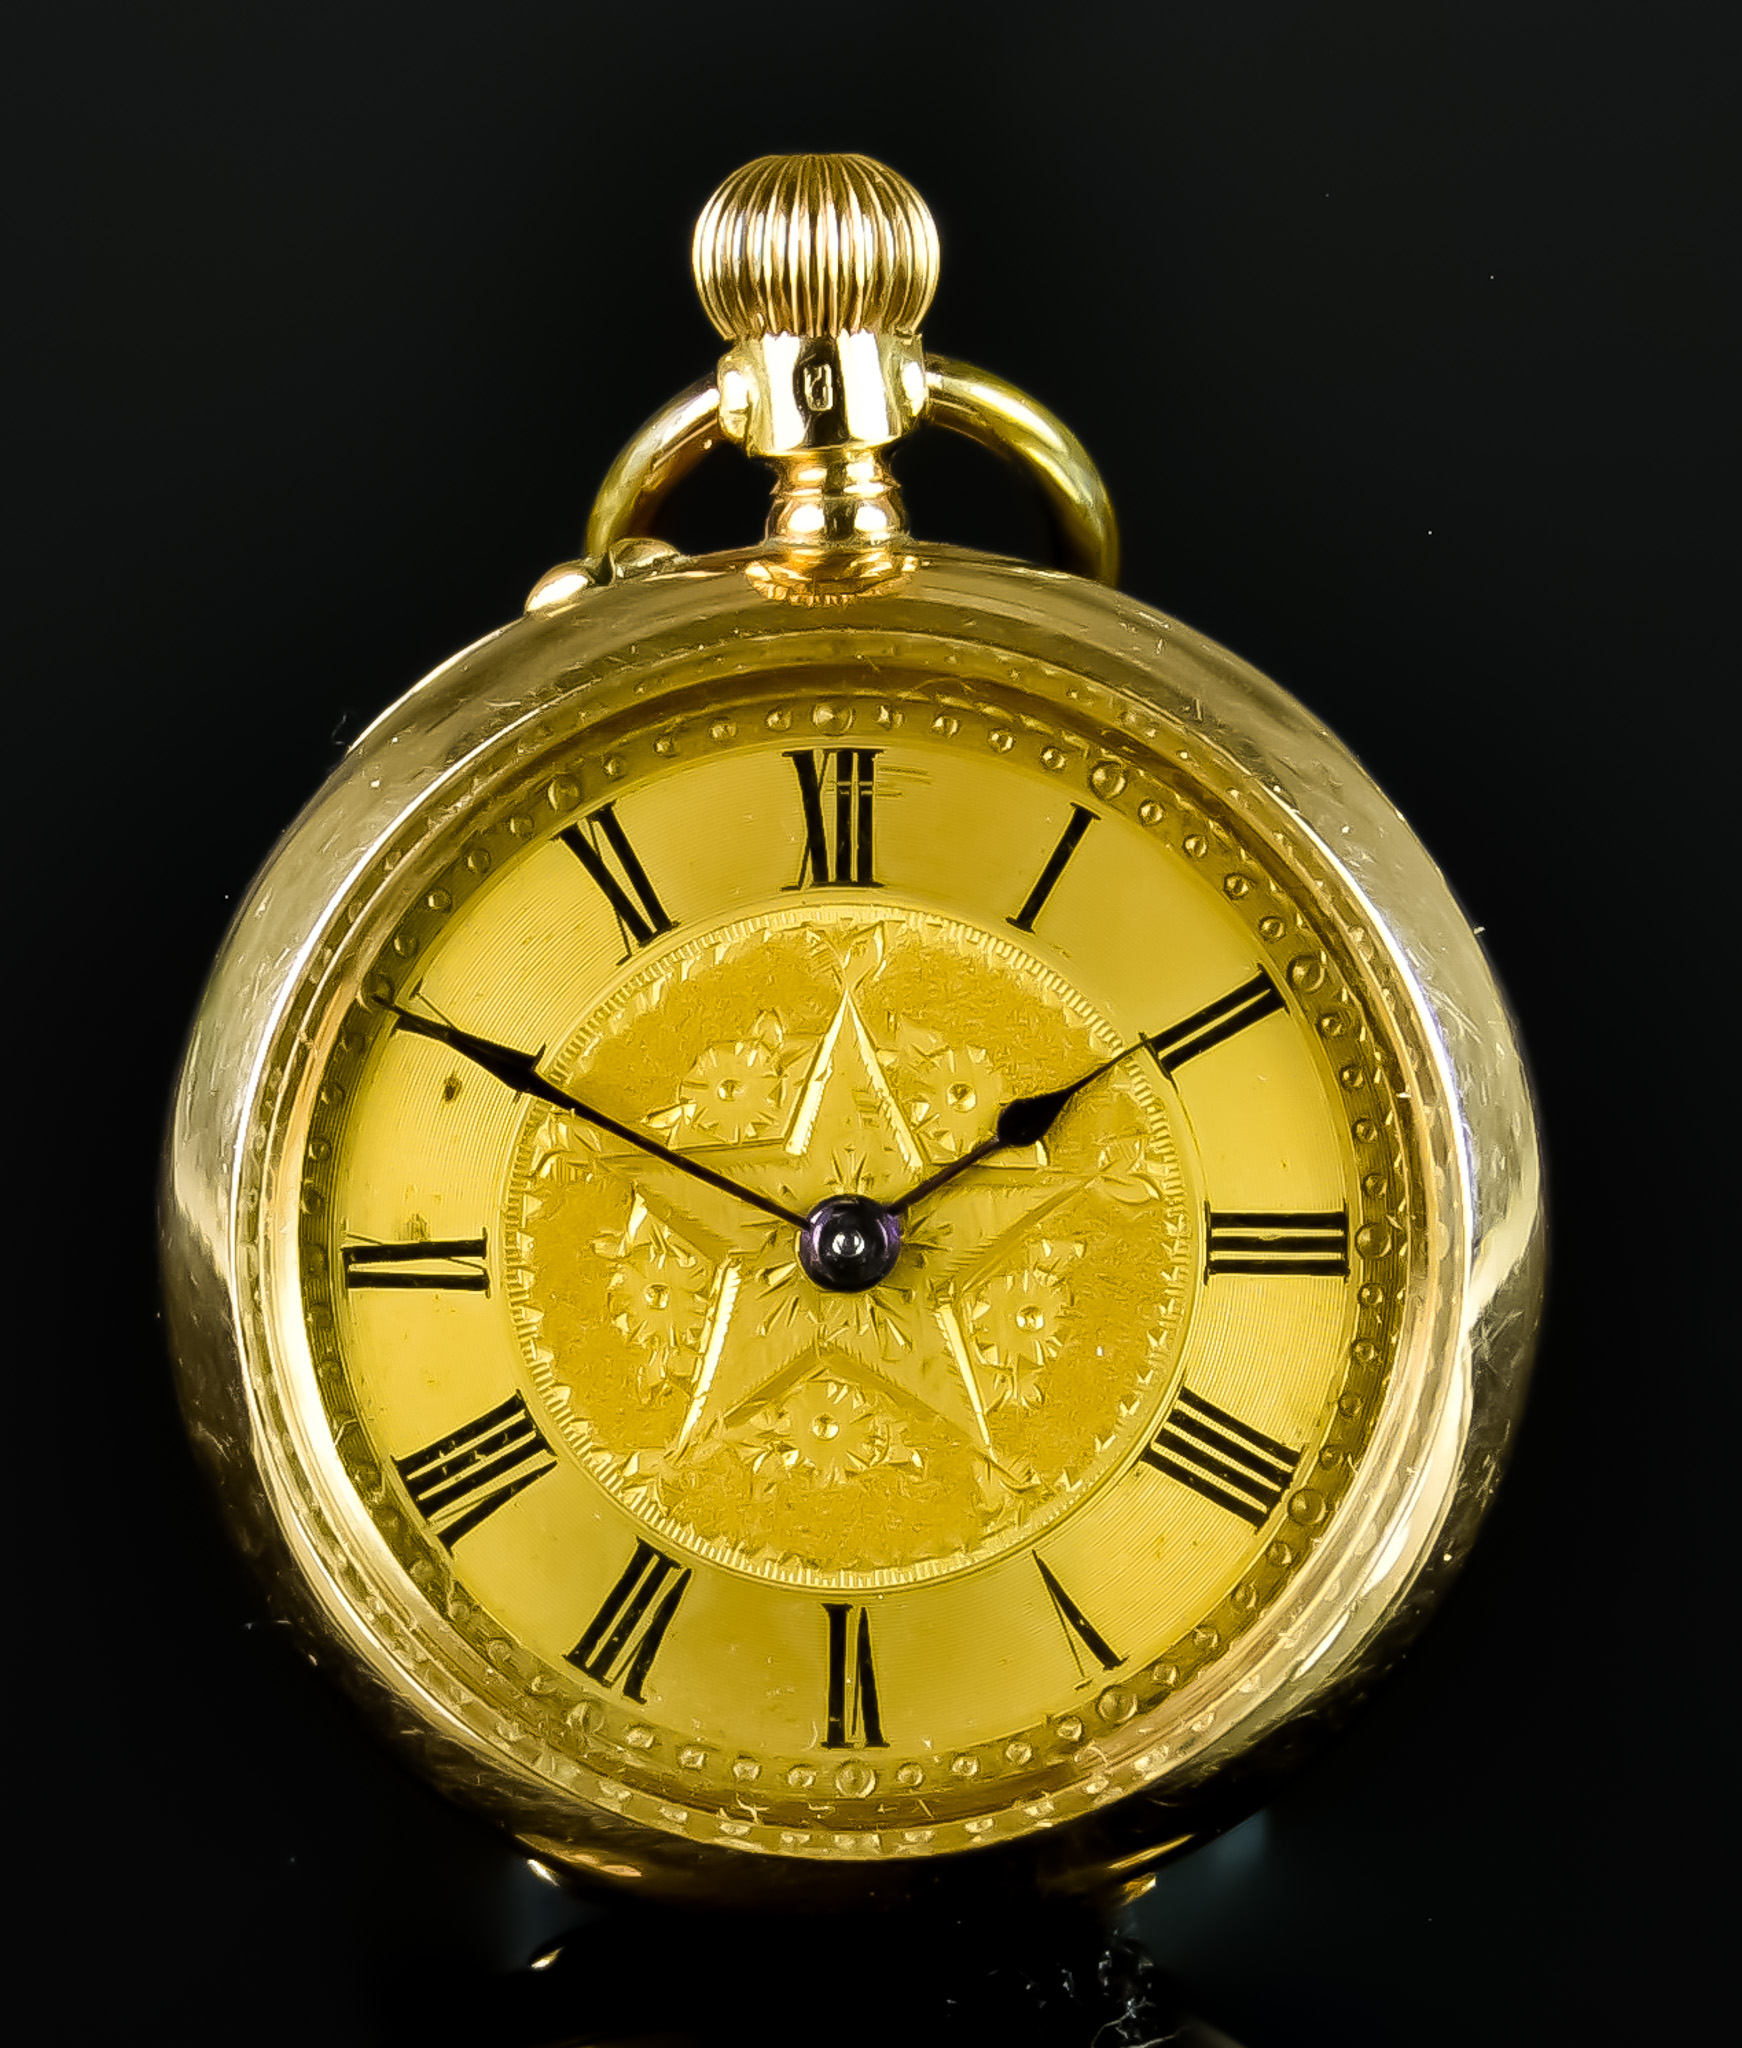 A Lady's Continental 18ct Gold Cased Fob Watch, 20th Century, case 34mm diameter, gold coloured dial